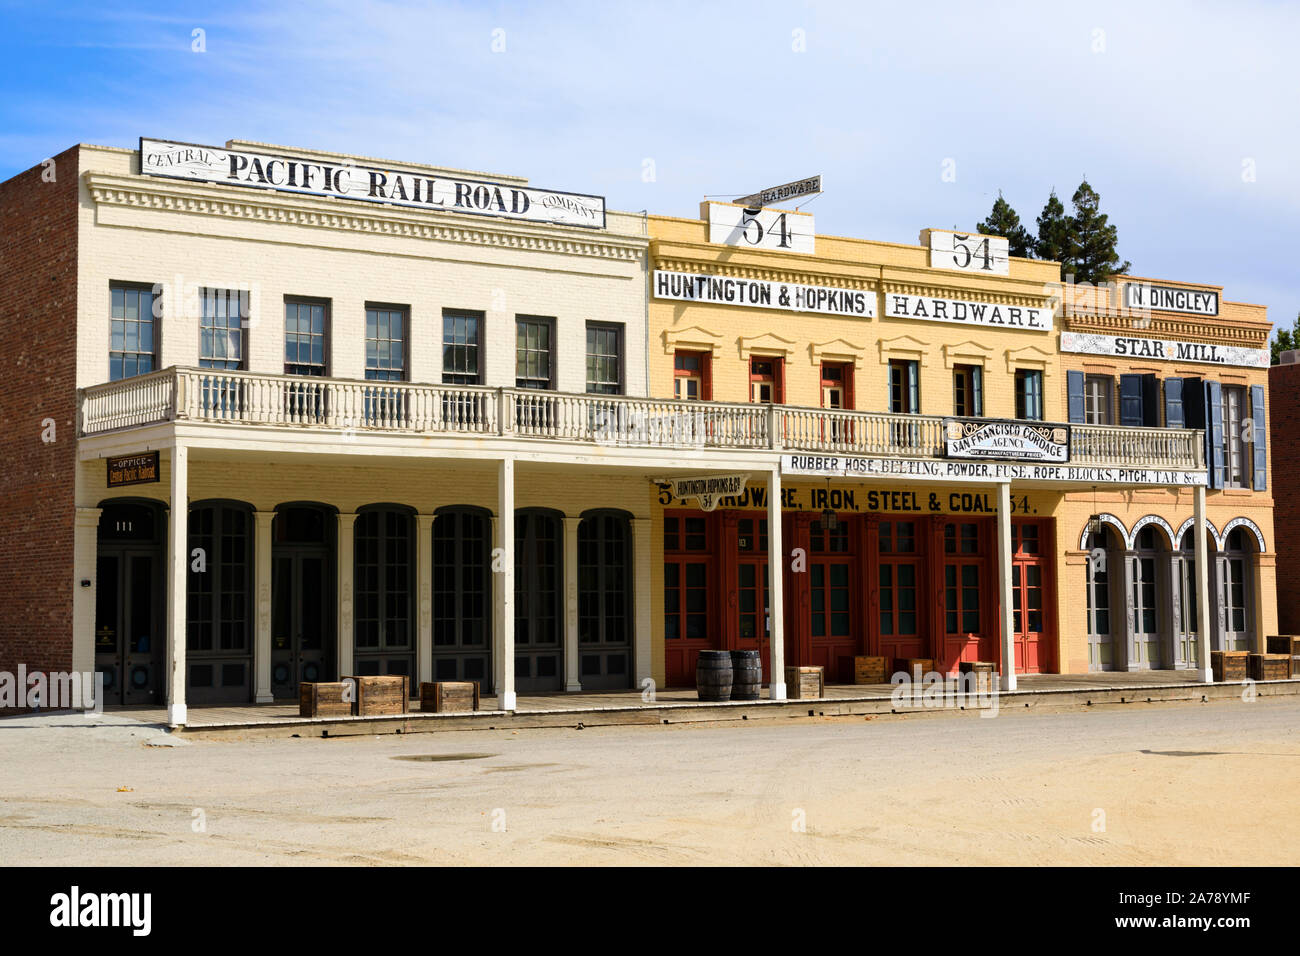 Central Pacific Rail road Company office, Huntington and Hopkins hardware store and N. Dingley Star Mill, Old Town, Sacramento, California USA Stock Photo